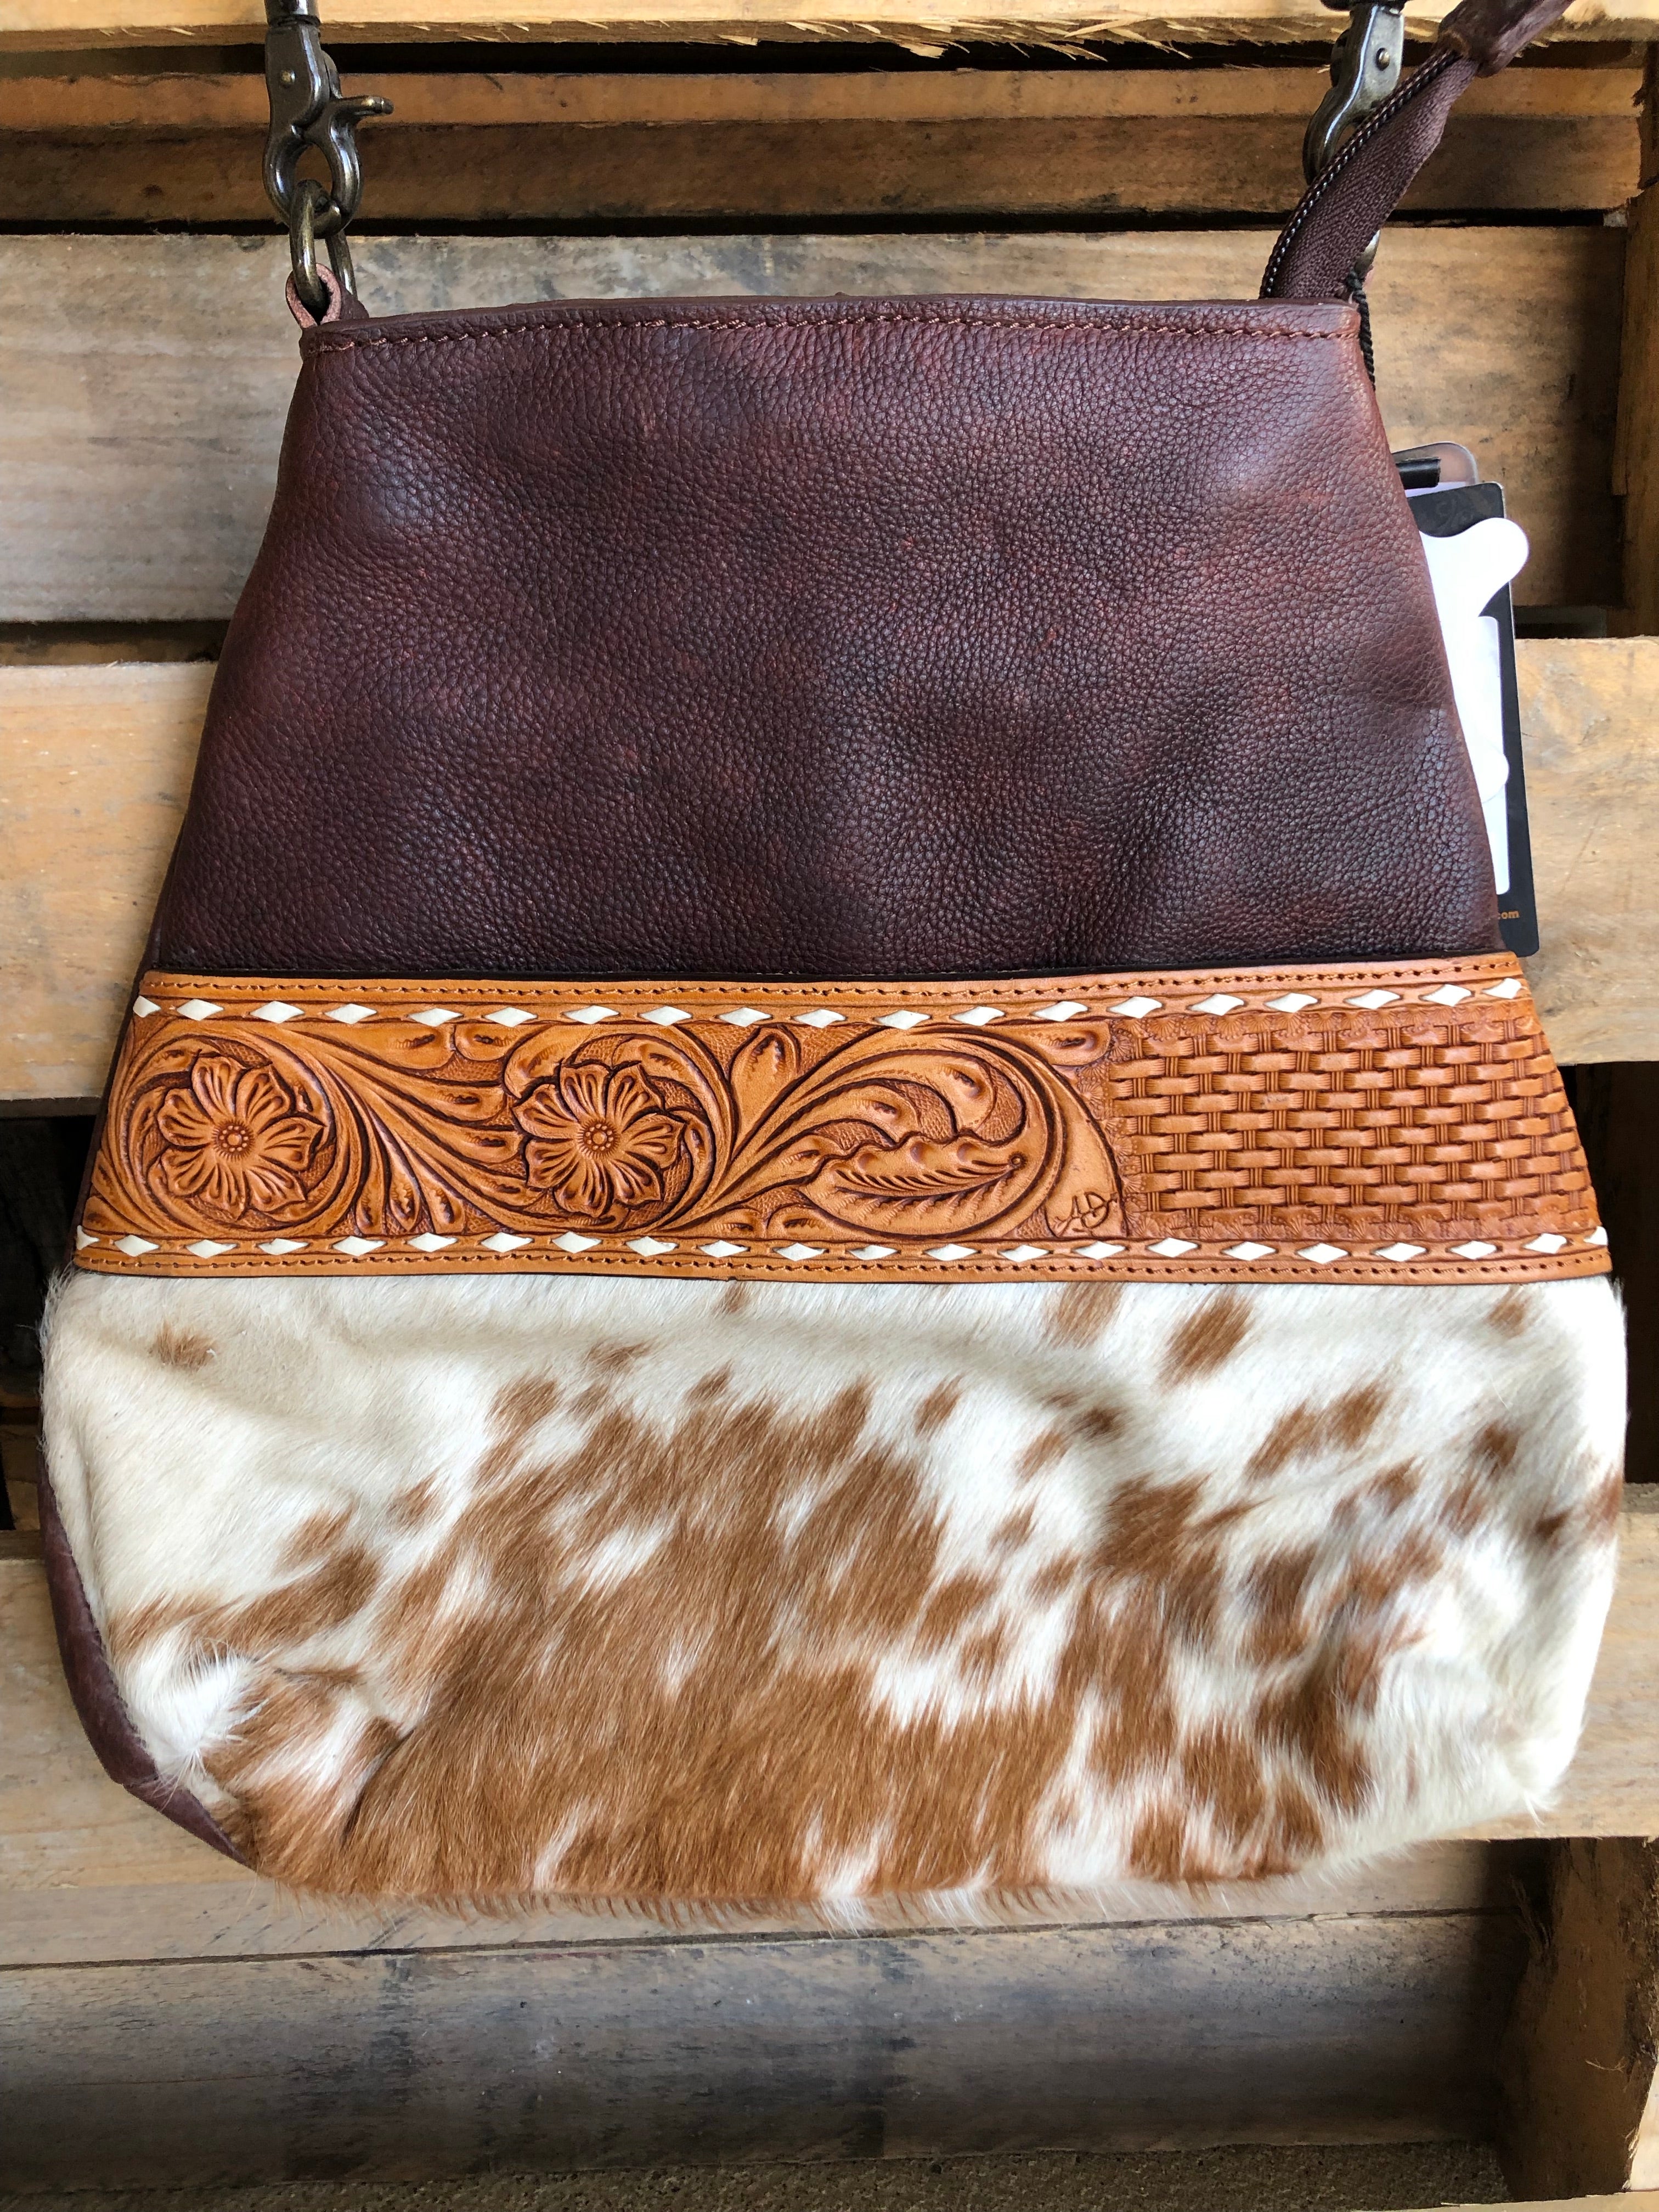 Wholesale Cowhide Bag, Wholesale Cowhide Bag Manufacturers & Suppliers |  Made-in-China.com